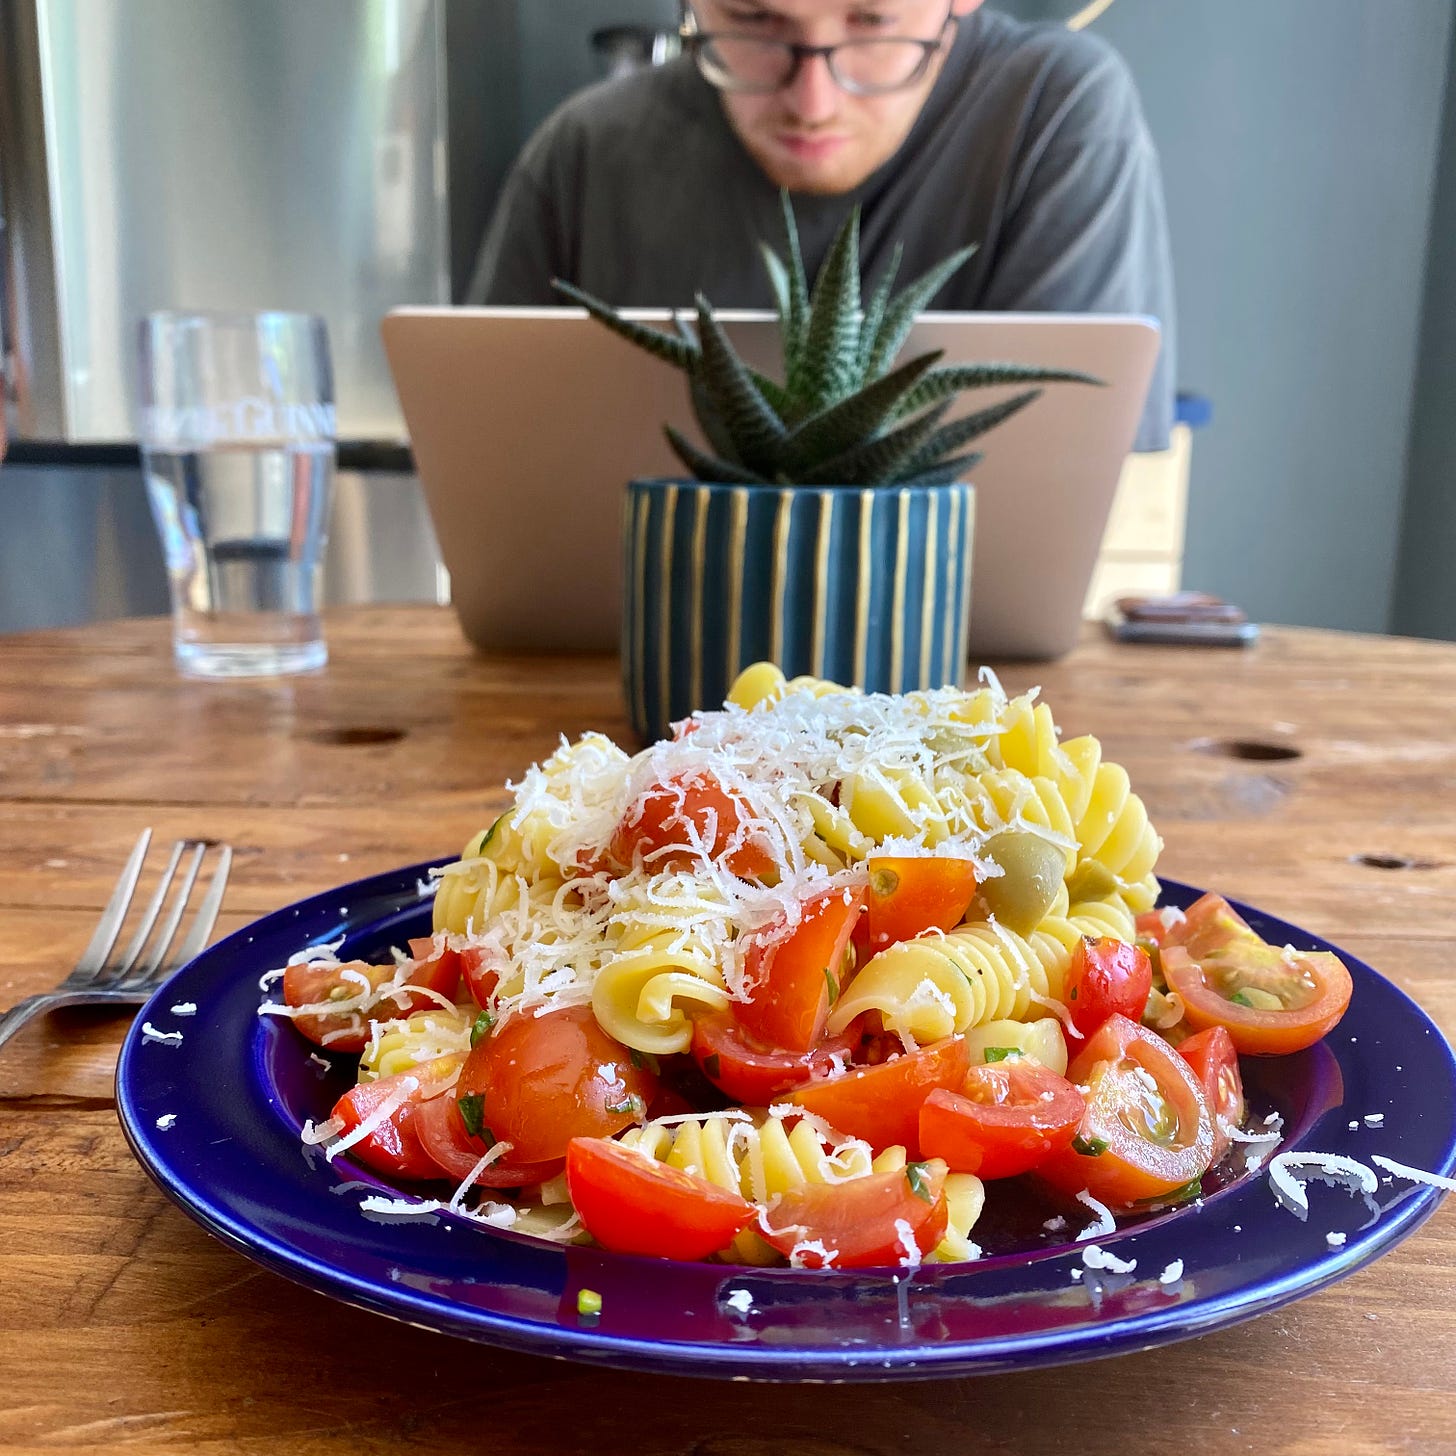 Blue plate serving fusilli pasta with fresh tomatoes and green olives, scattered with grated cheese. Person working at a laptop in the background.